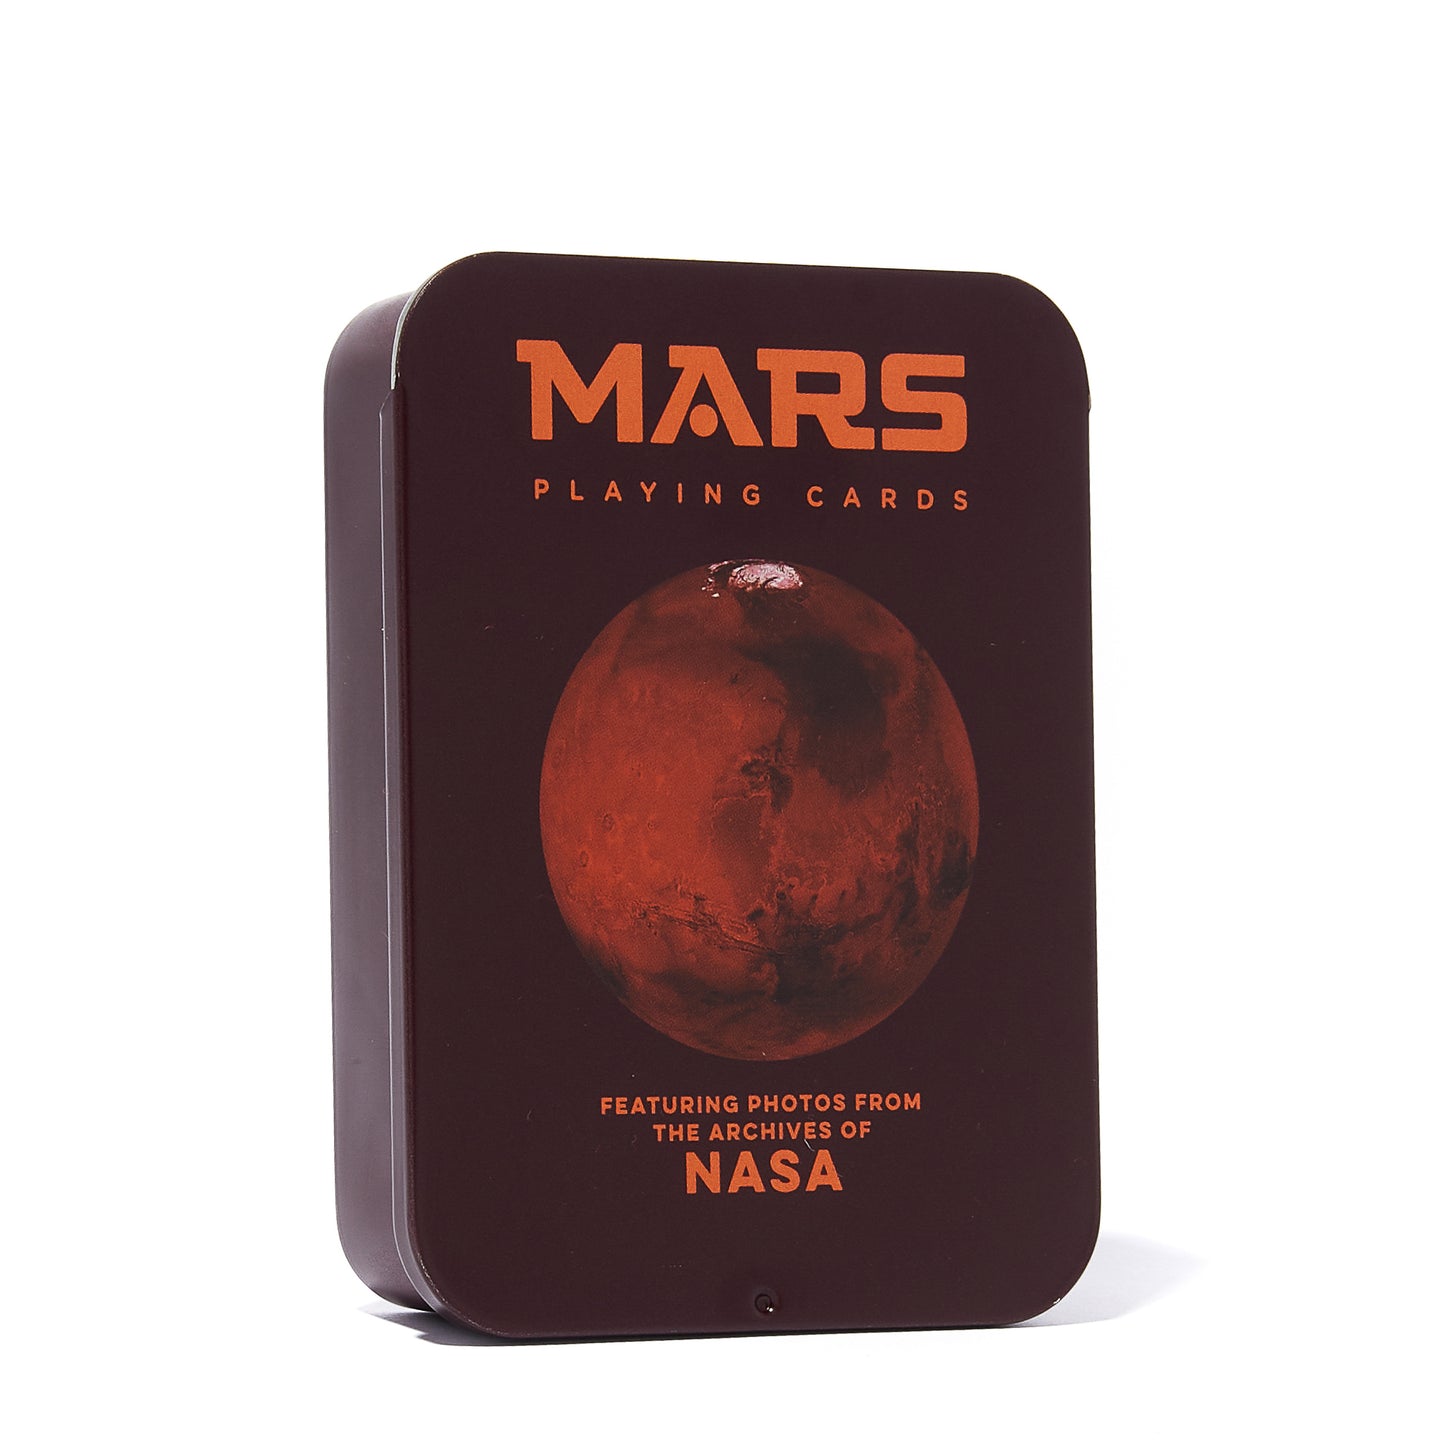 MARS PLAYING CARDS